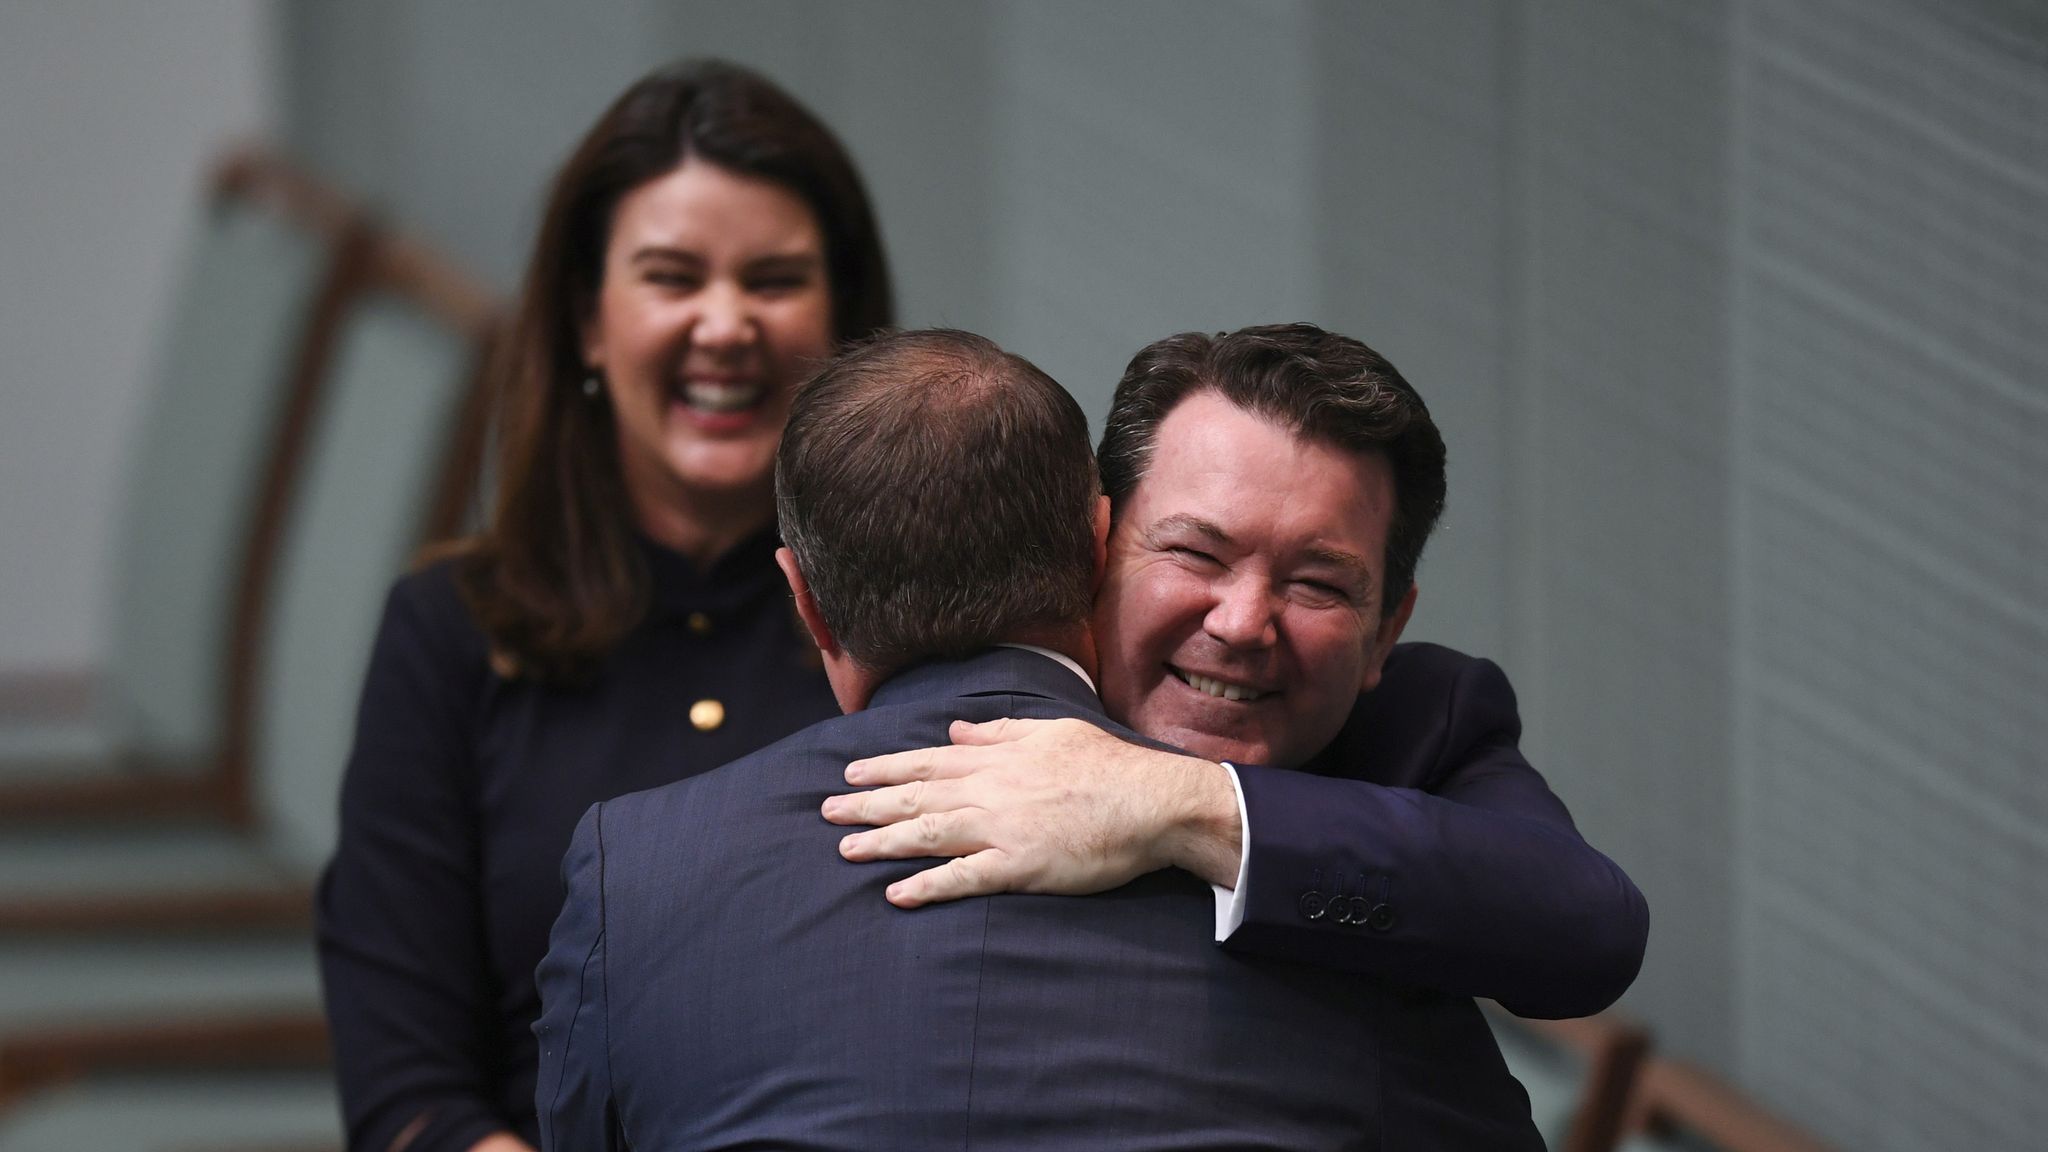 Mp Proposes To Gay Partner In Australian Parliament During Same Sex 